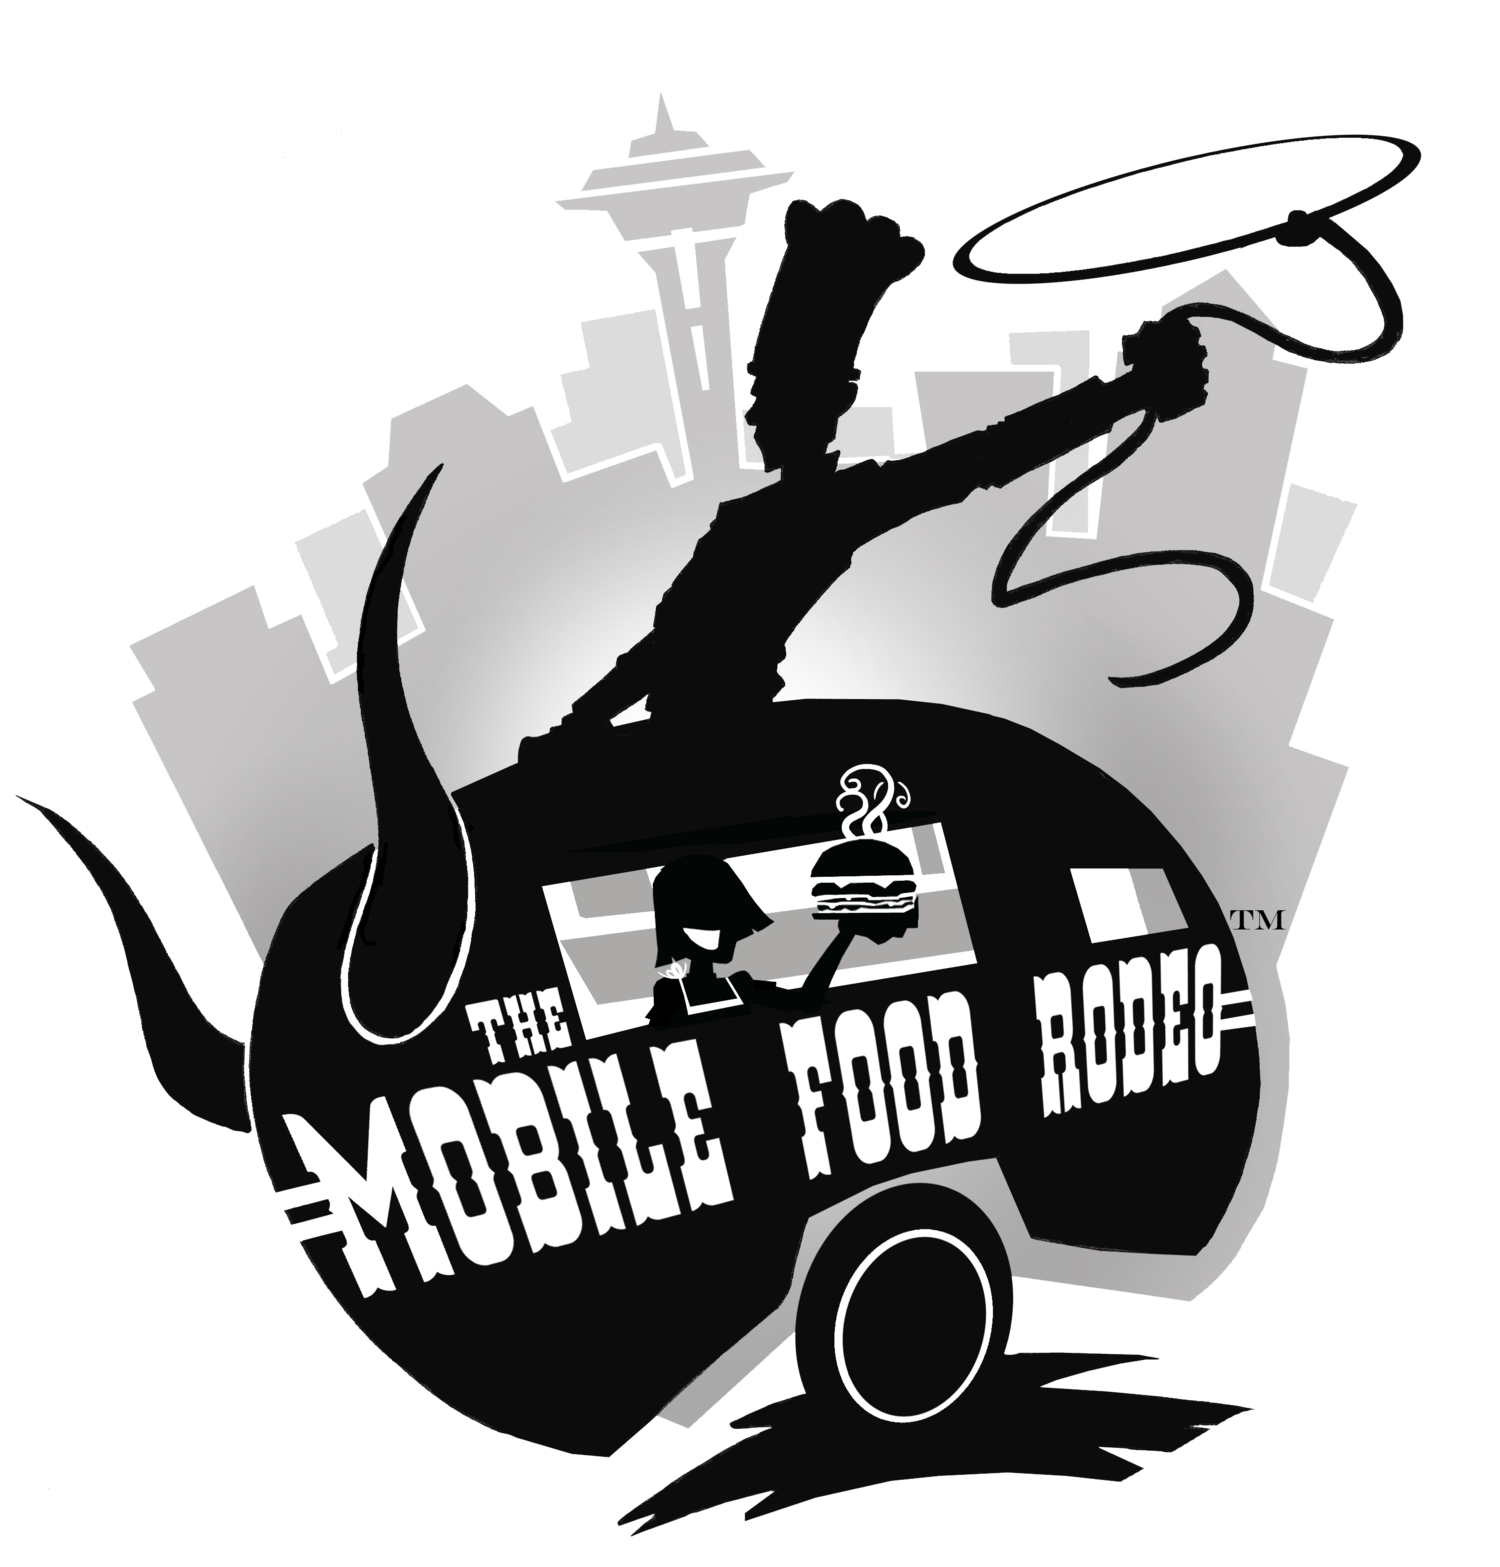 MOBILE FOOD RODEO 